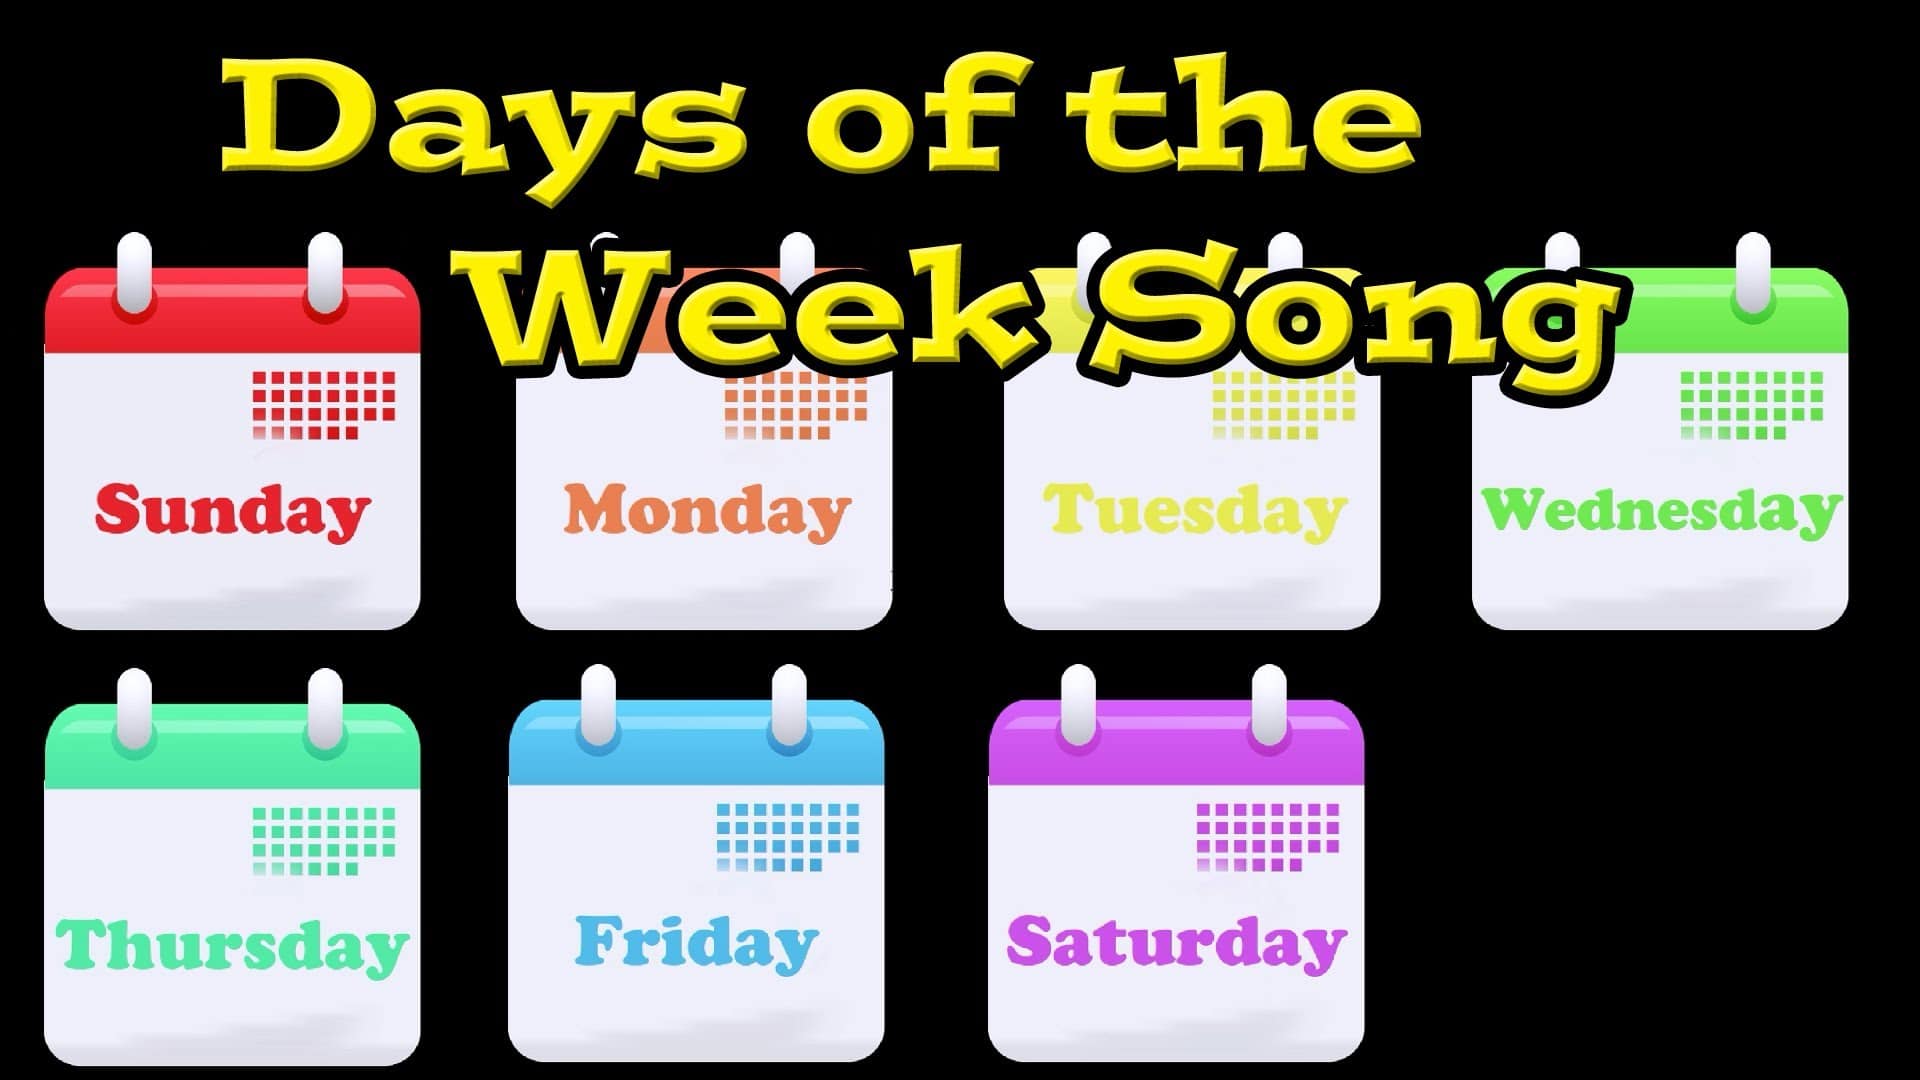 Days of the week for kids song. Days of the week. Days of the week Song. Days of the week for Kids. Days of the week картинки.